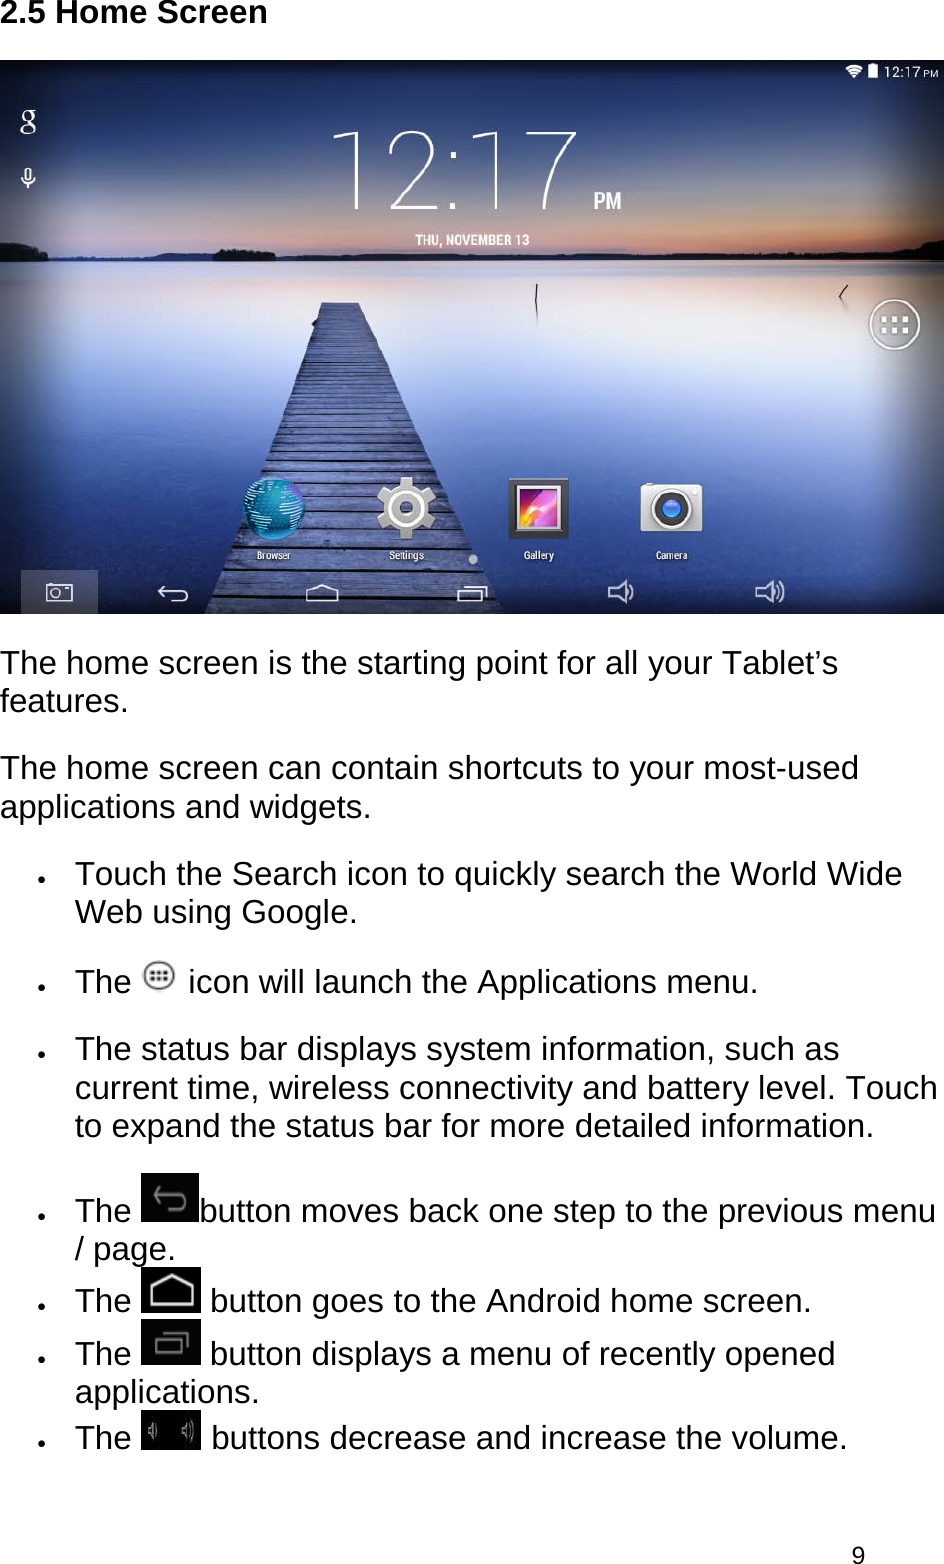  9 2.5 Home Screen  The home screen is the starting point for all your Tablet’s features. The home screen can contain shortcuts to your most-used applications and widgets.  • Touch the Search icon to quickly search the World Wide Web using Google.  • The   icon will launch the Applications menu.  • The status bar displays system information, such as current time, wireless connectivity and battery level. Touch to expand the status bar for more detailed information.  • The  button moves back one step to the previous menu / page.  • The   button goes to the Android home screen.  • The   button displays a menu of recently opened applications.  • The   buttons decrease and increase the volume.  